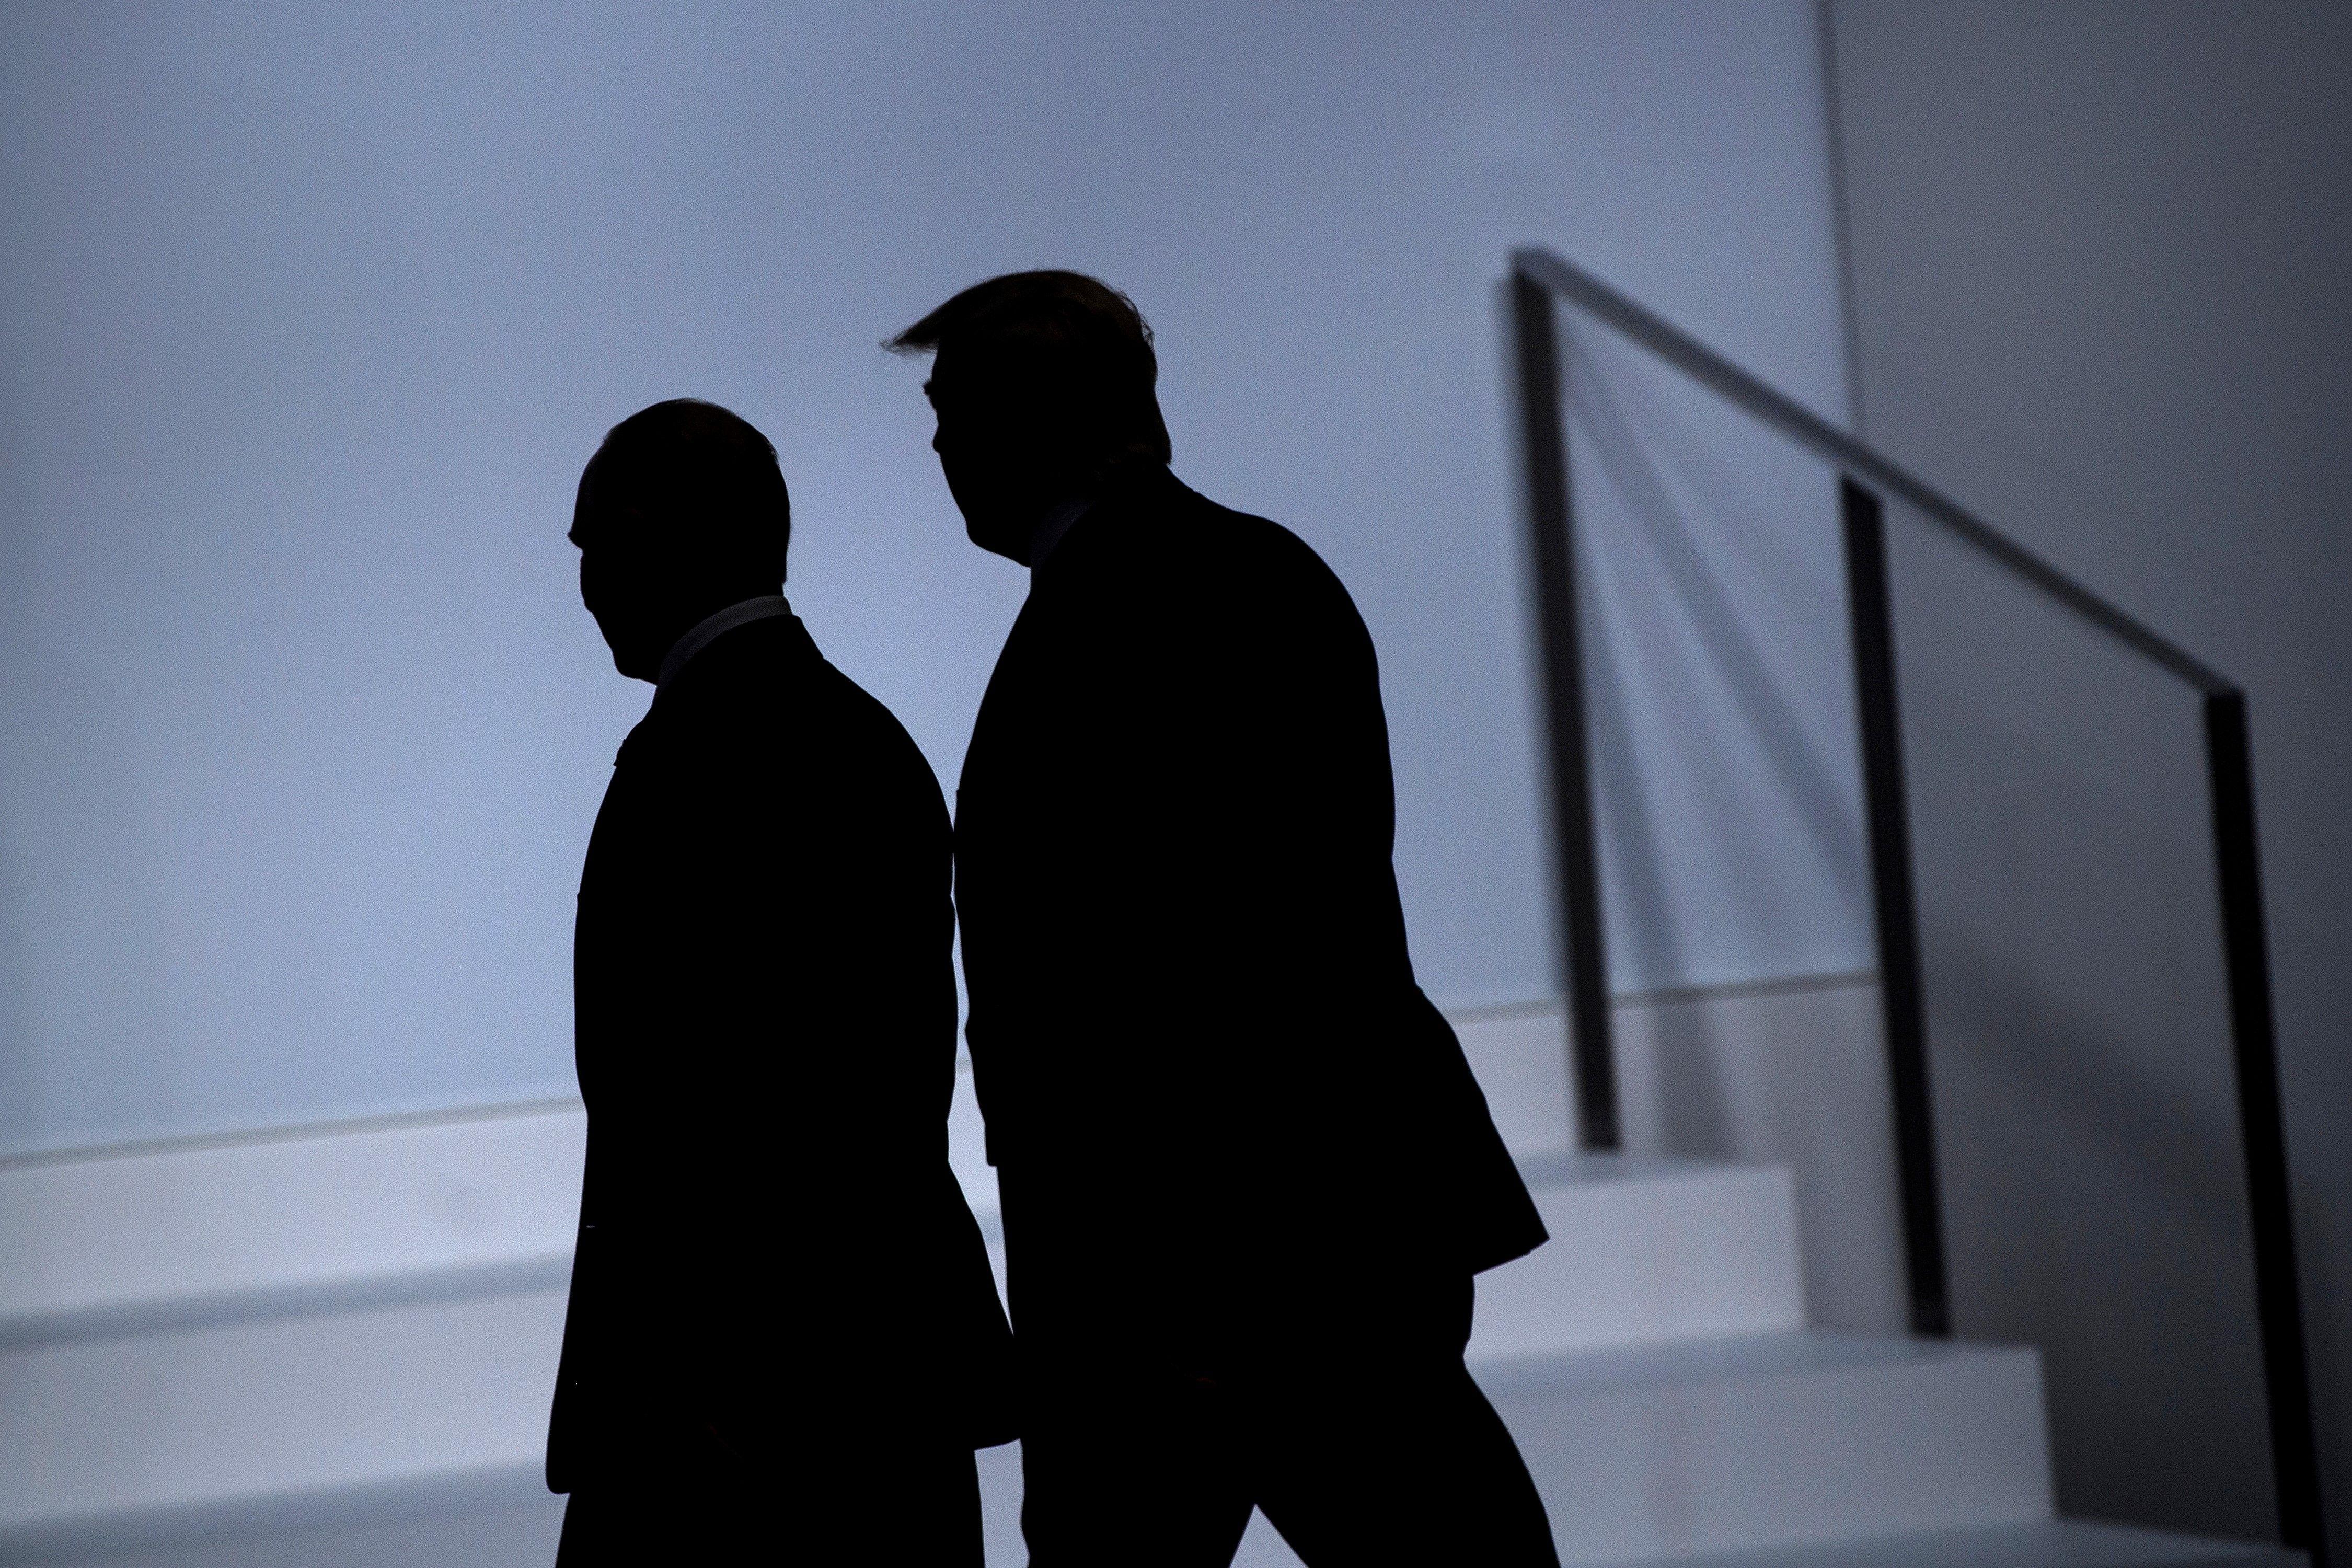 Silhouettes of Trump and Putin